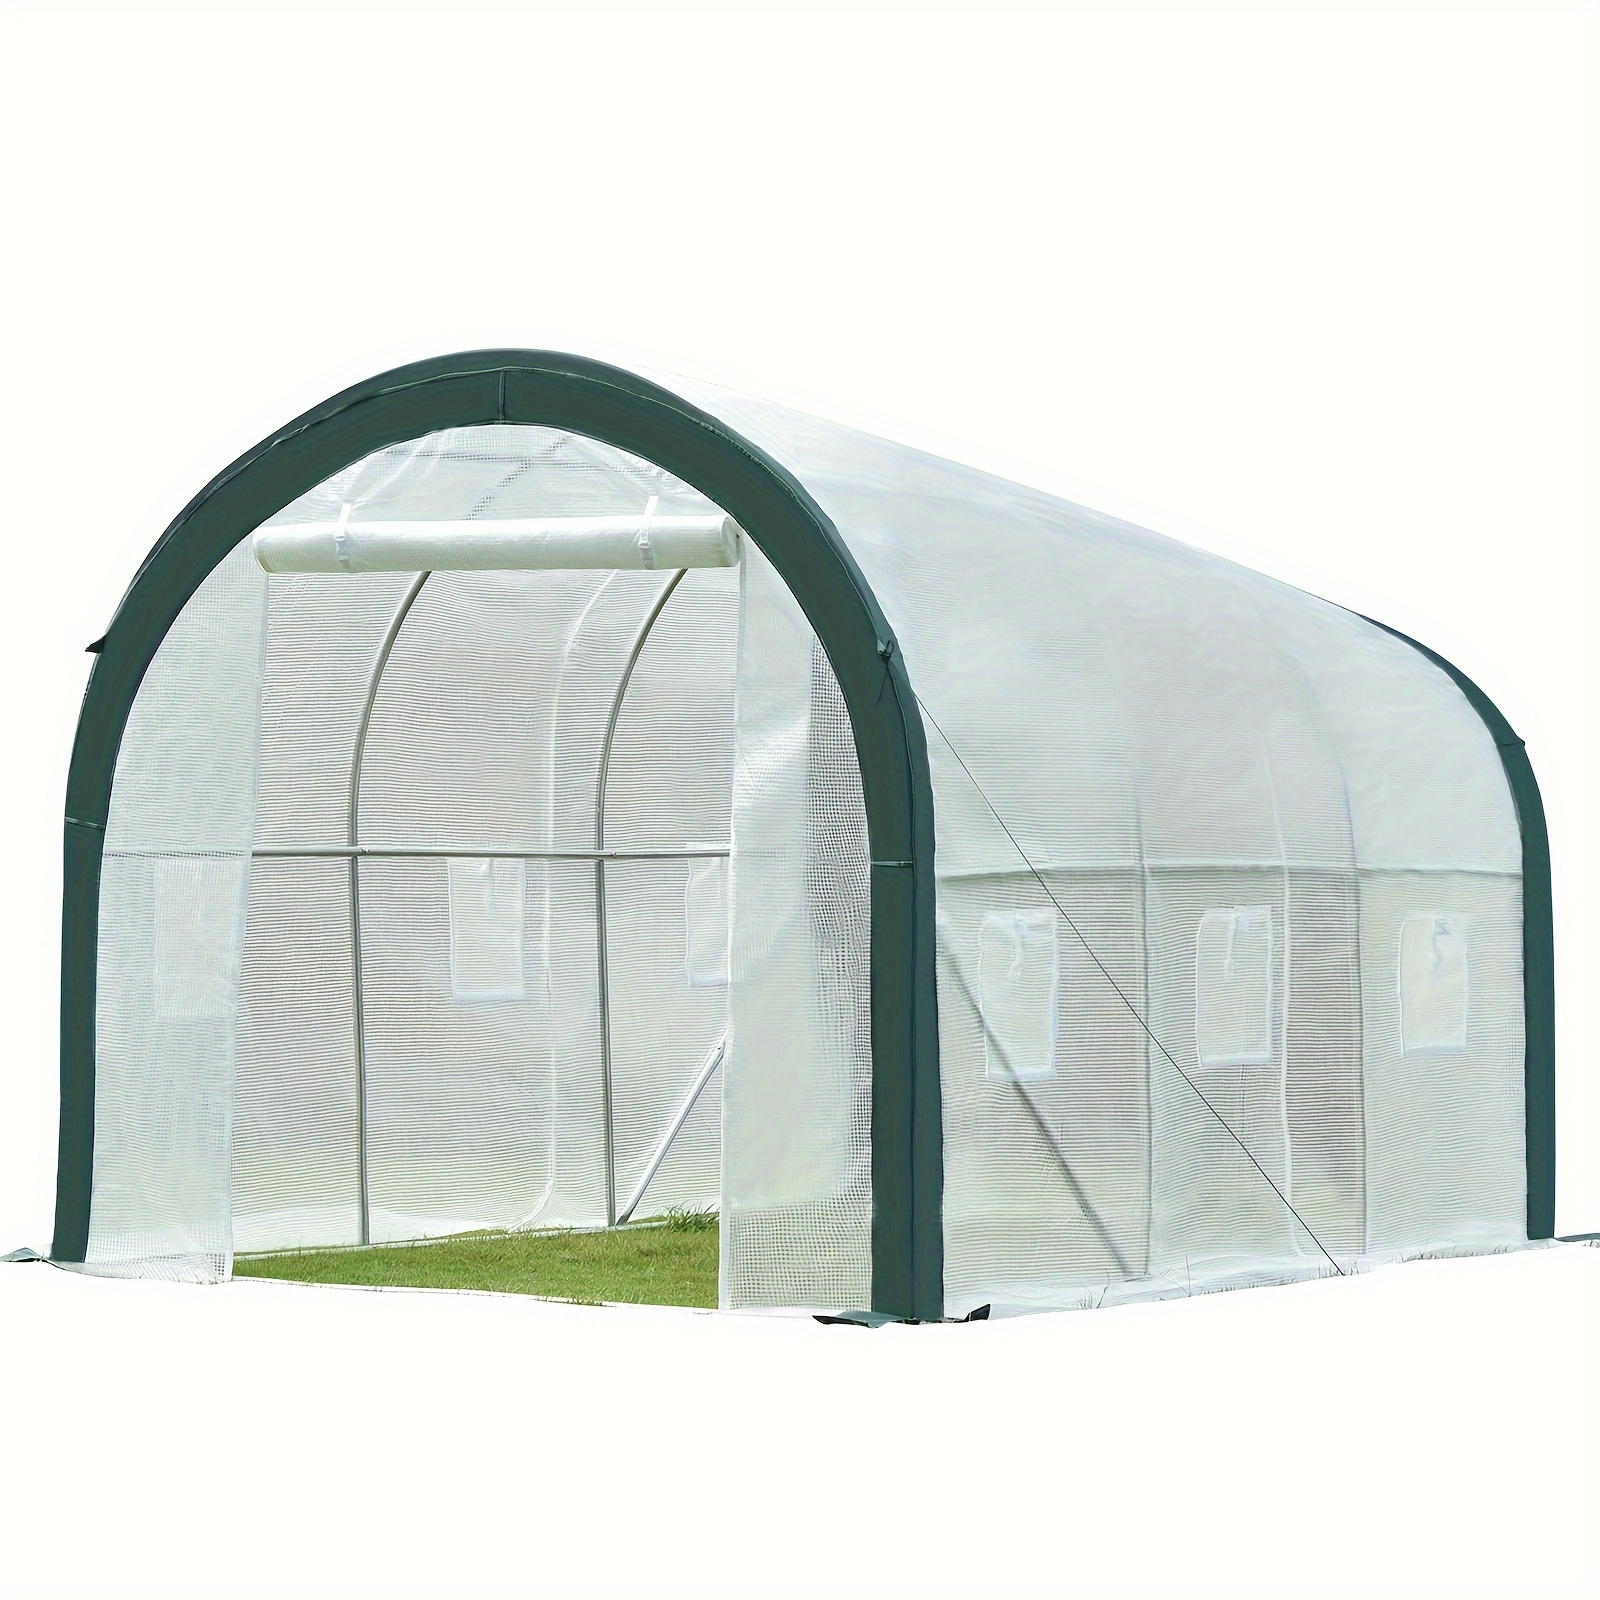 

12 Ft. X 7 Ft. X 7 Ft. Walk-in Tunnel Greenhouse Patio Greenhouse Heavy Duty Frame - White